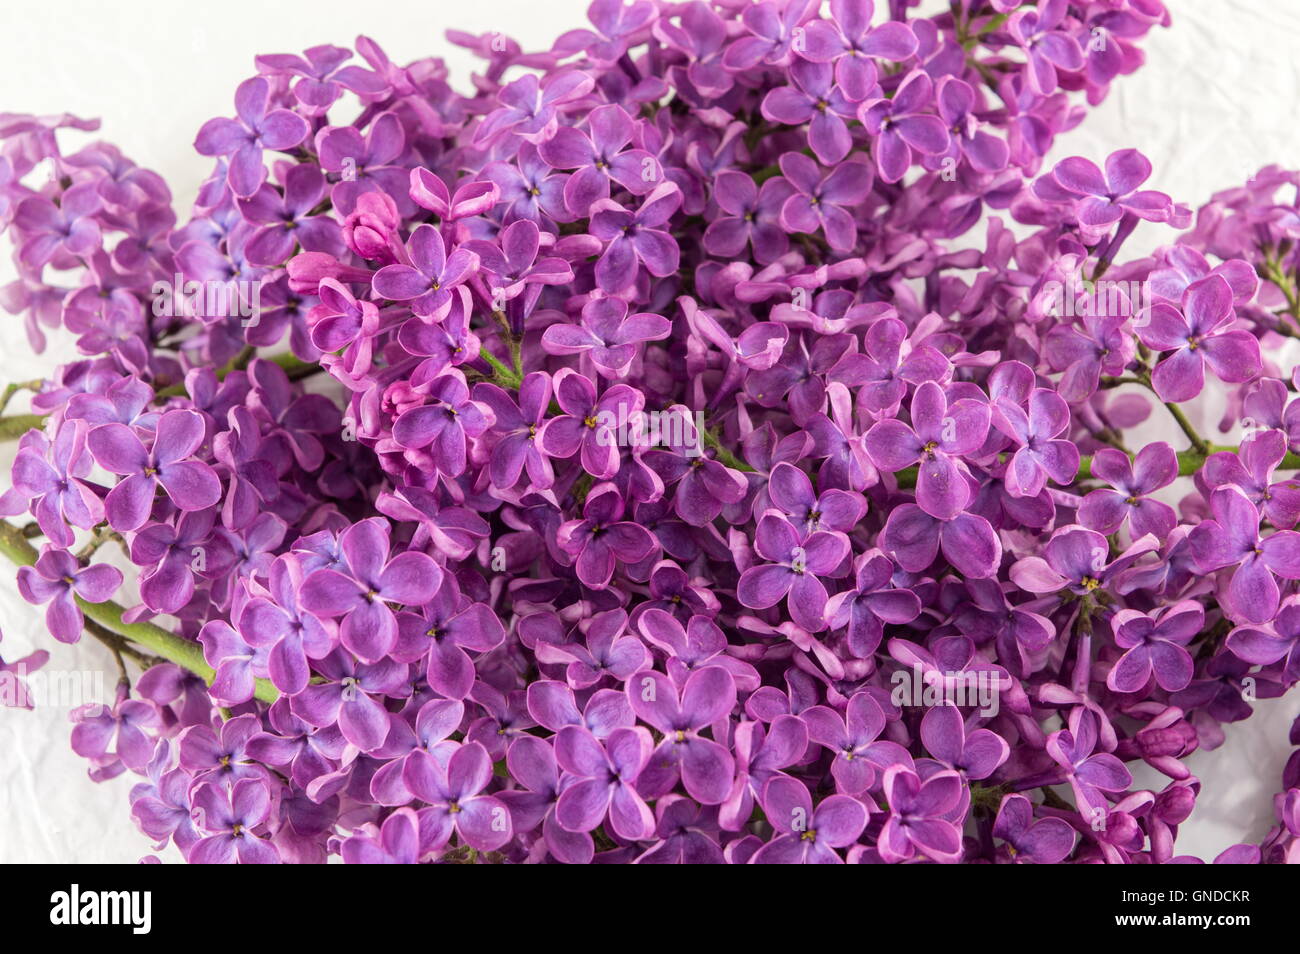 Purple lilac flowers on white textile background Stock Photo